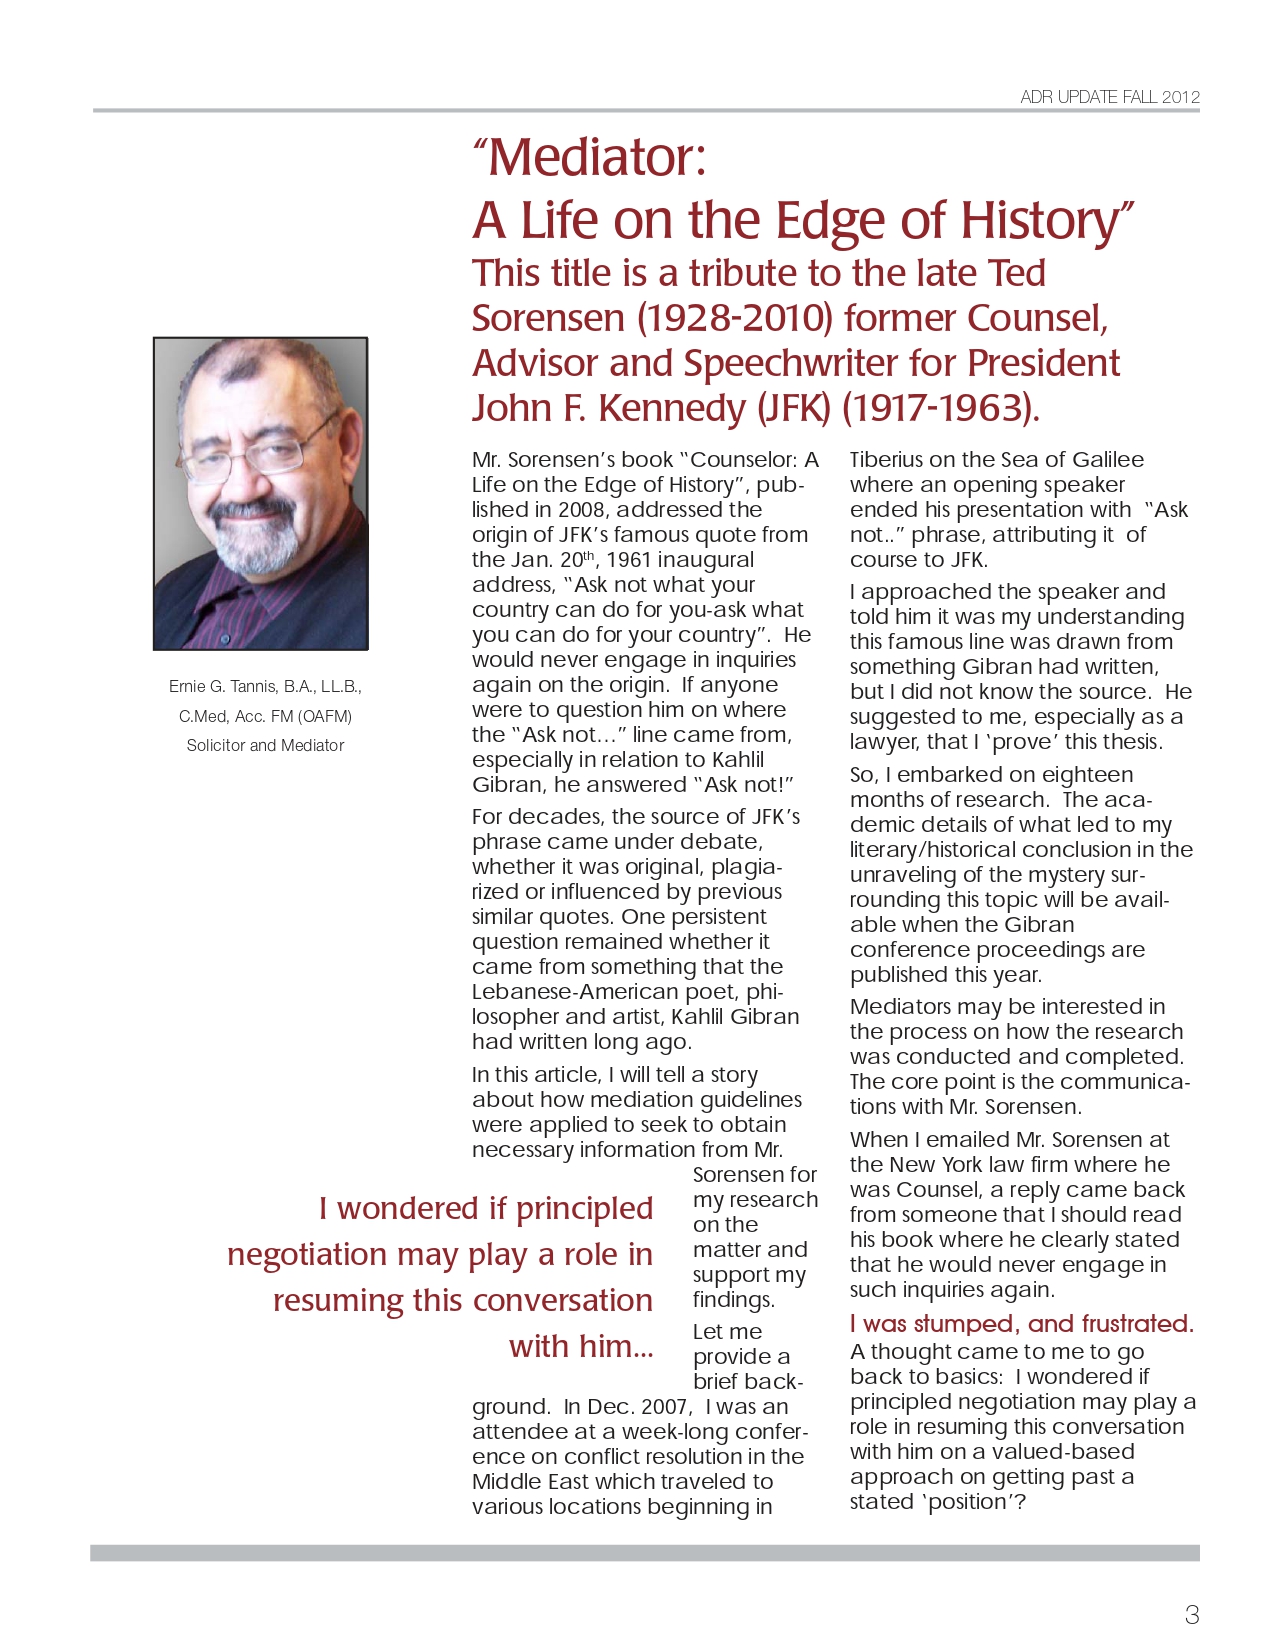 Ernie G. Tannis, Mediator: A Life on the Edge of History, ADR, Fall 2012, pp. 3-4.